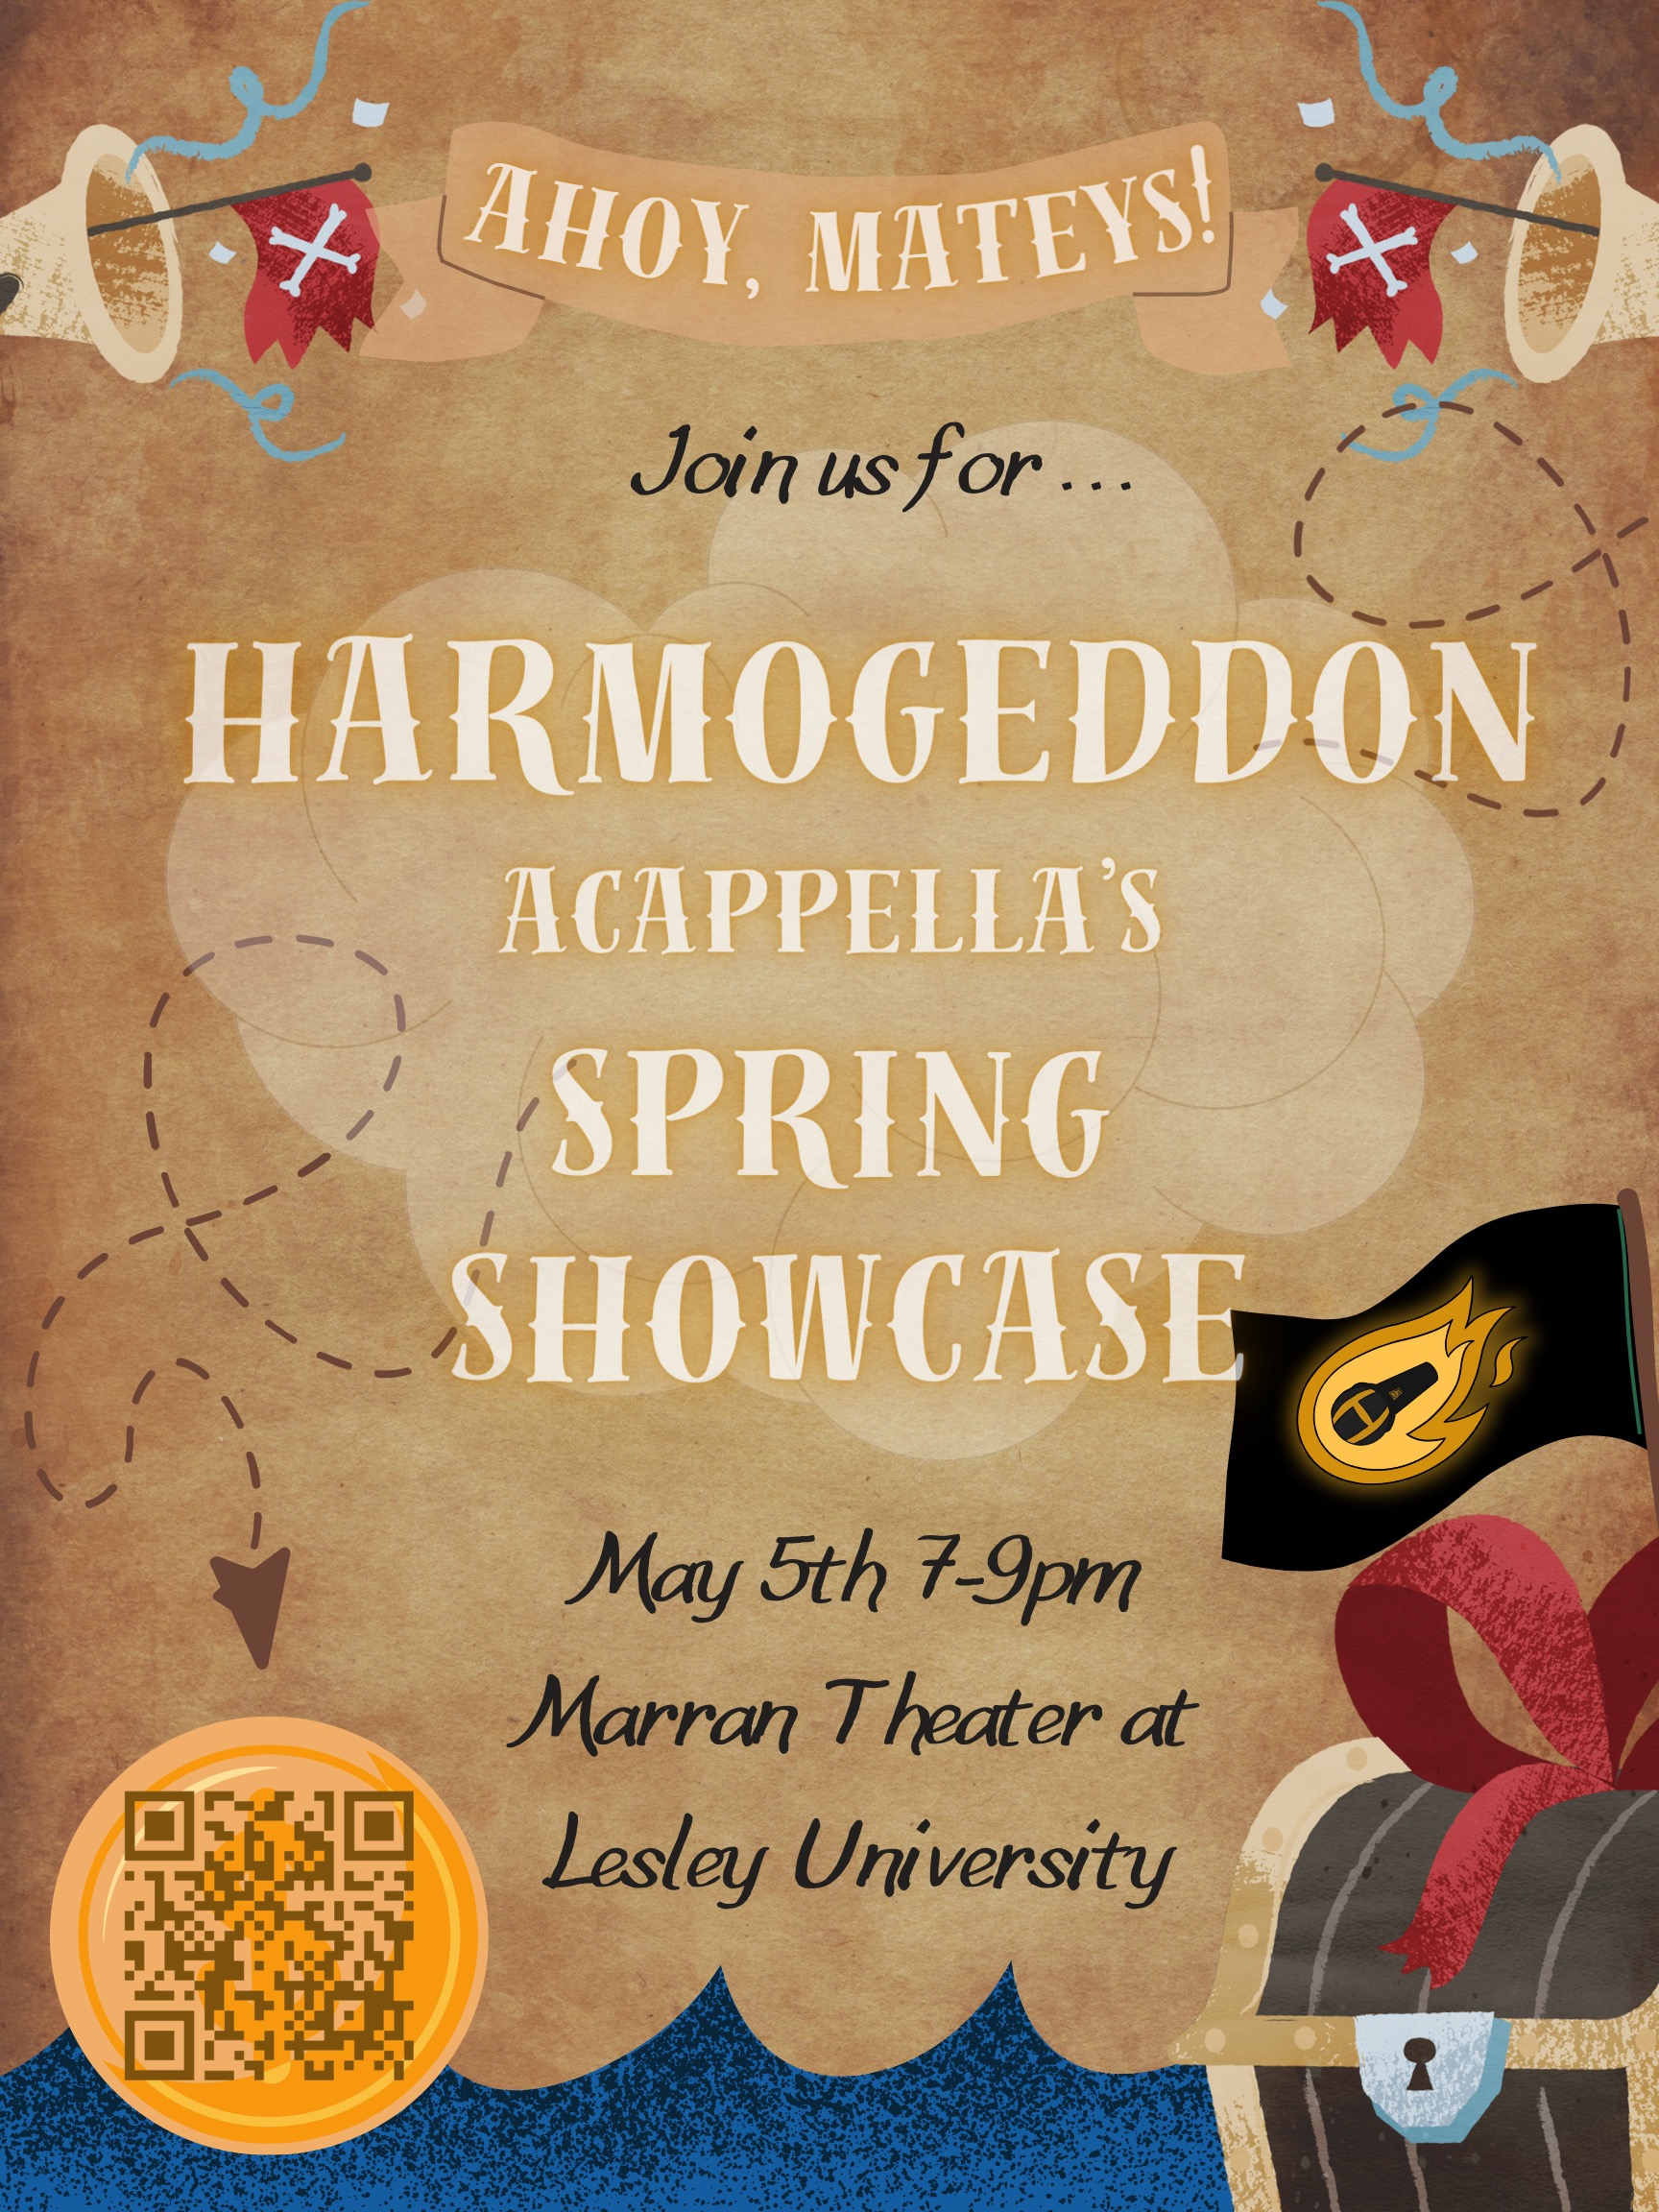 A poster for Harmogeddon's Spring Showcase, with the background a cartoon image of a pirates map.